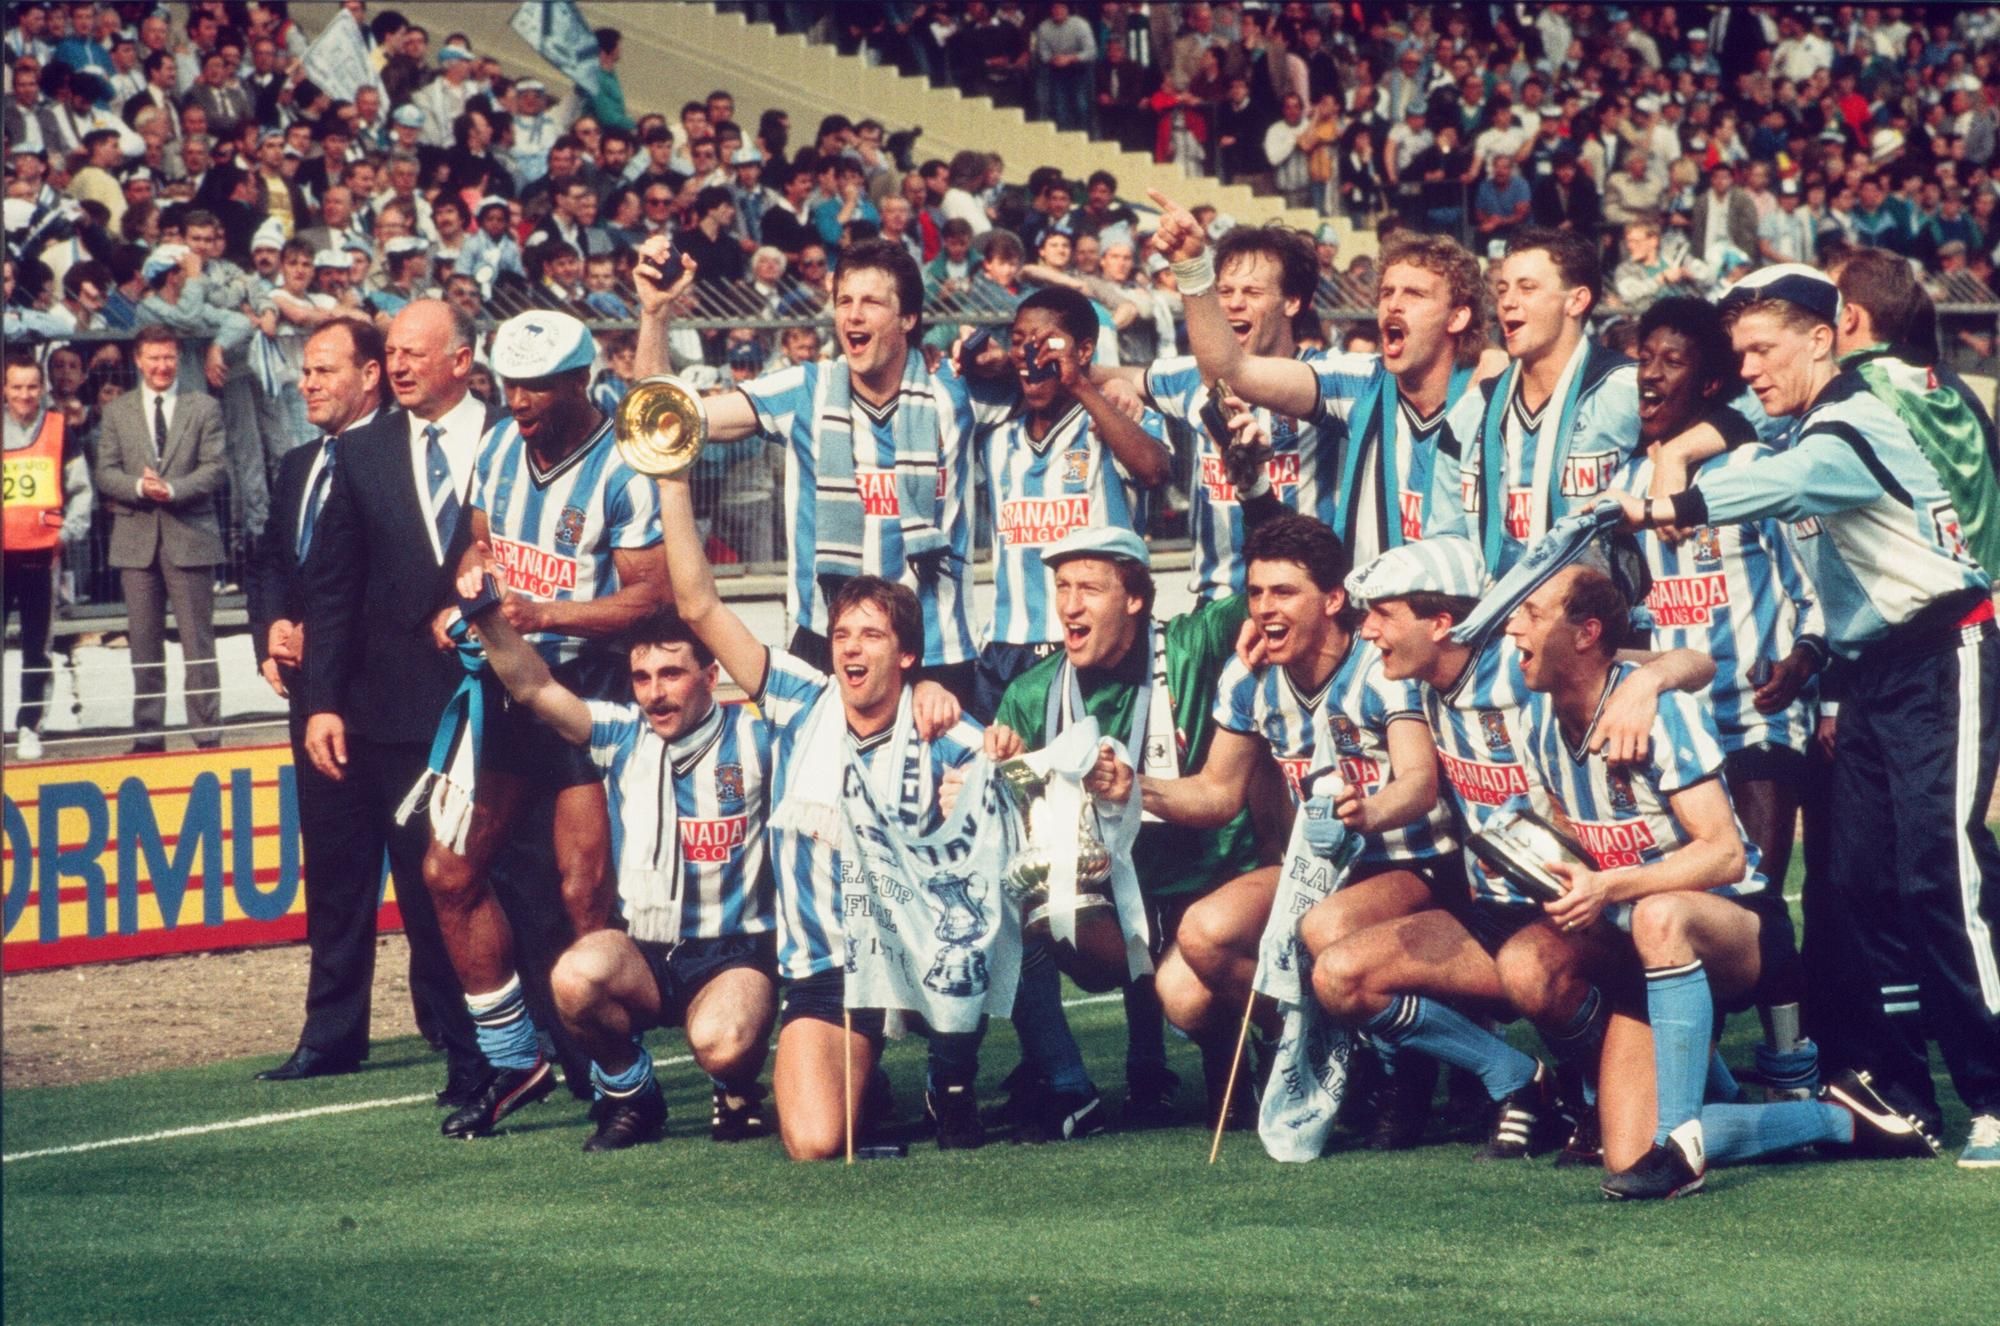 Coventry City's players celebrate their  3-2 win against Tottenham Hotspur in the FA Cup Final at Wembley.
16th May 1987.